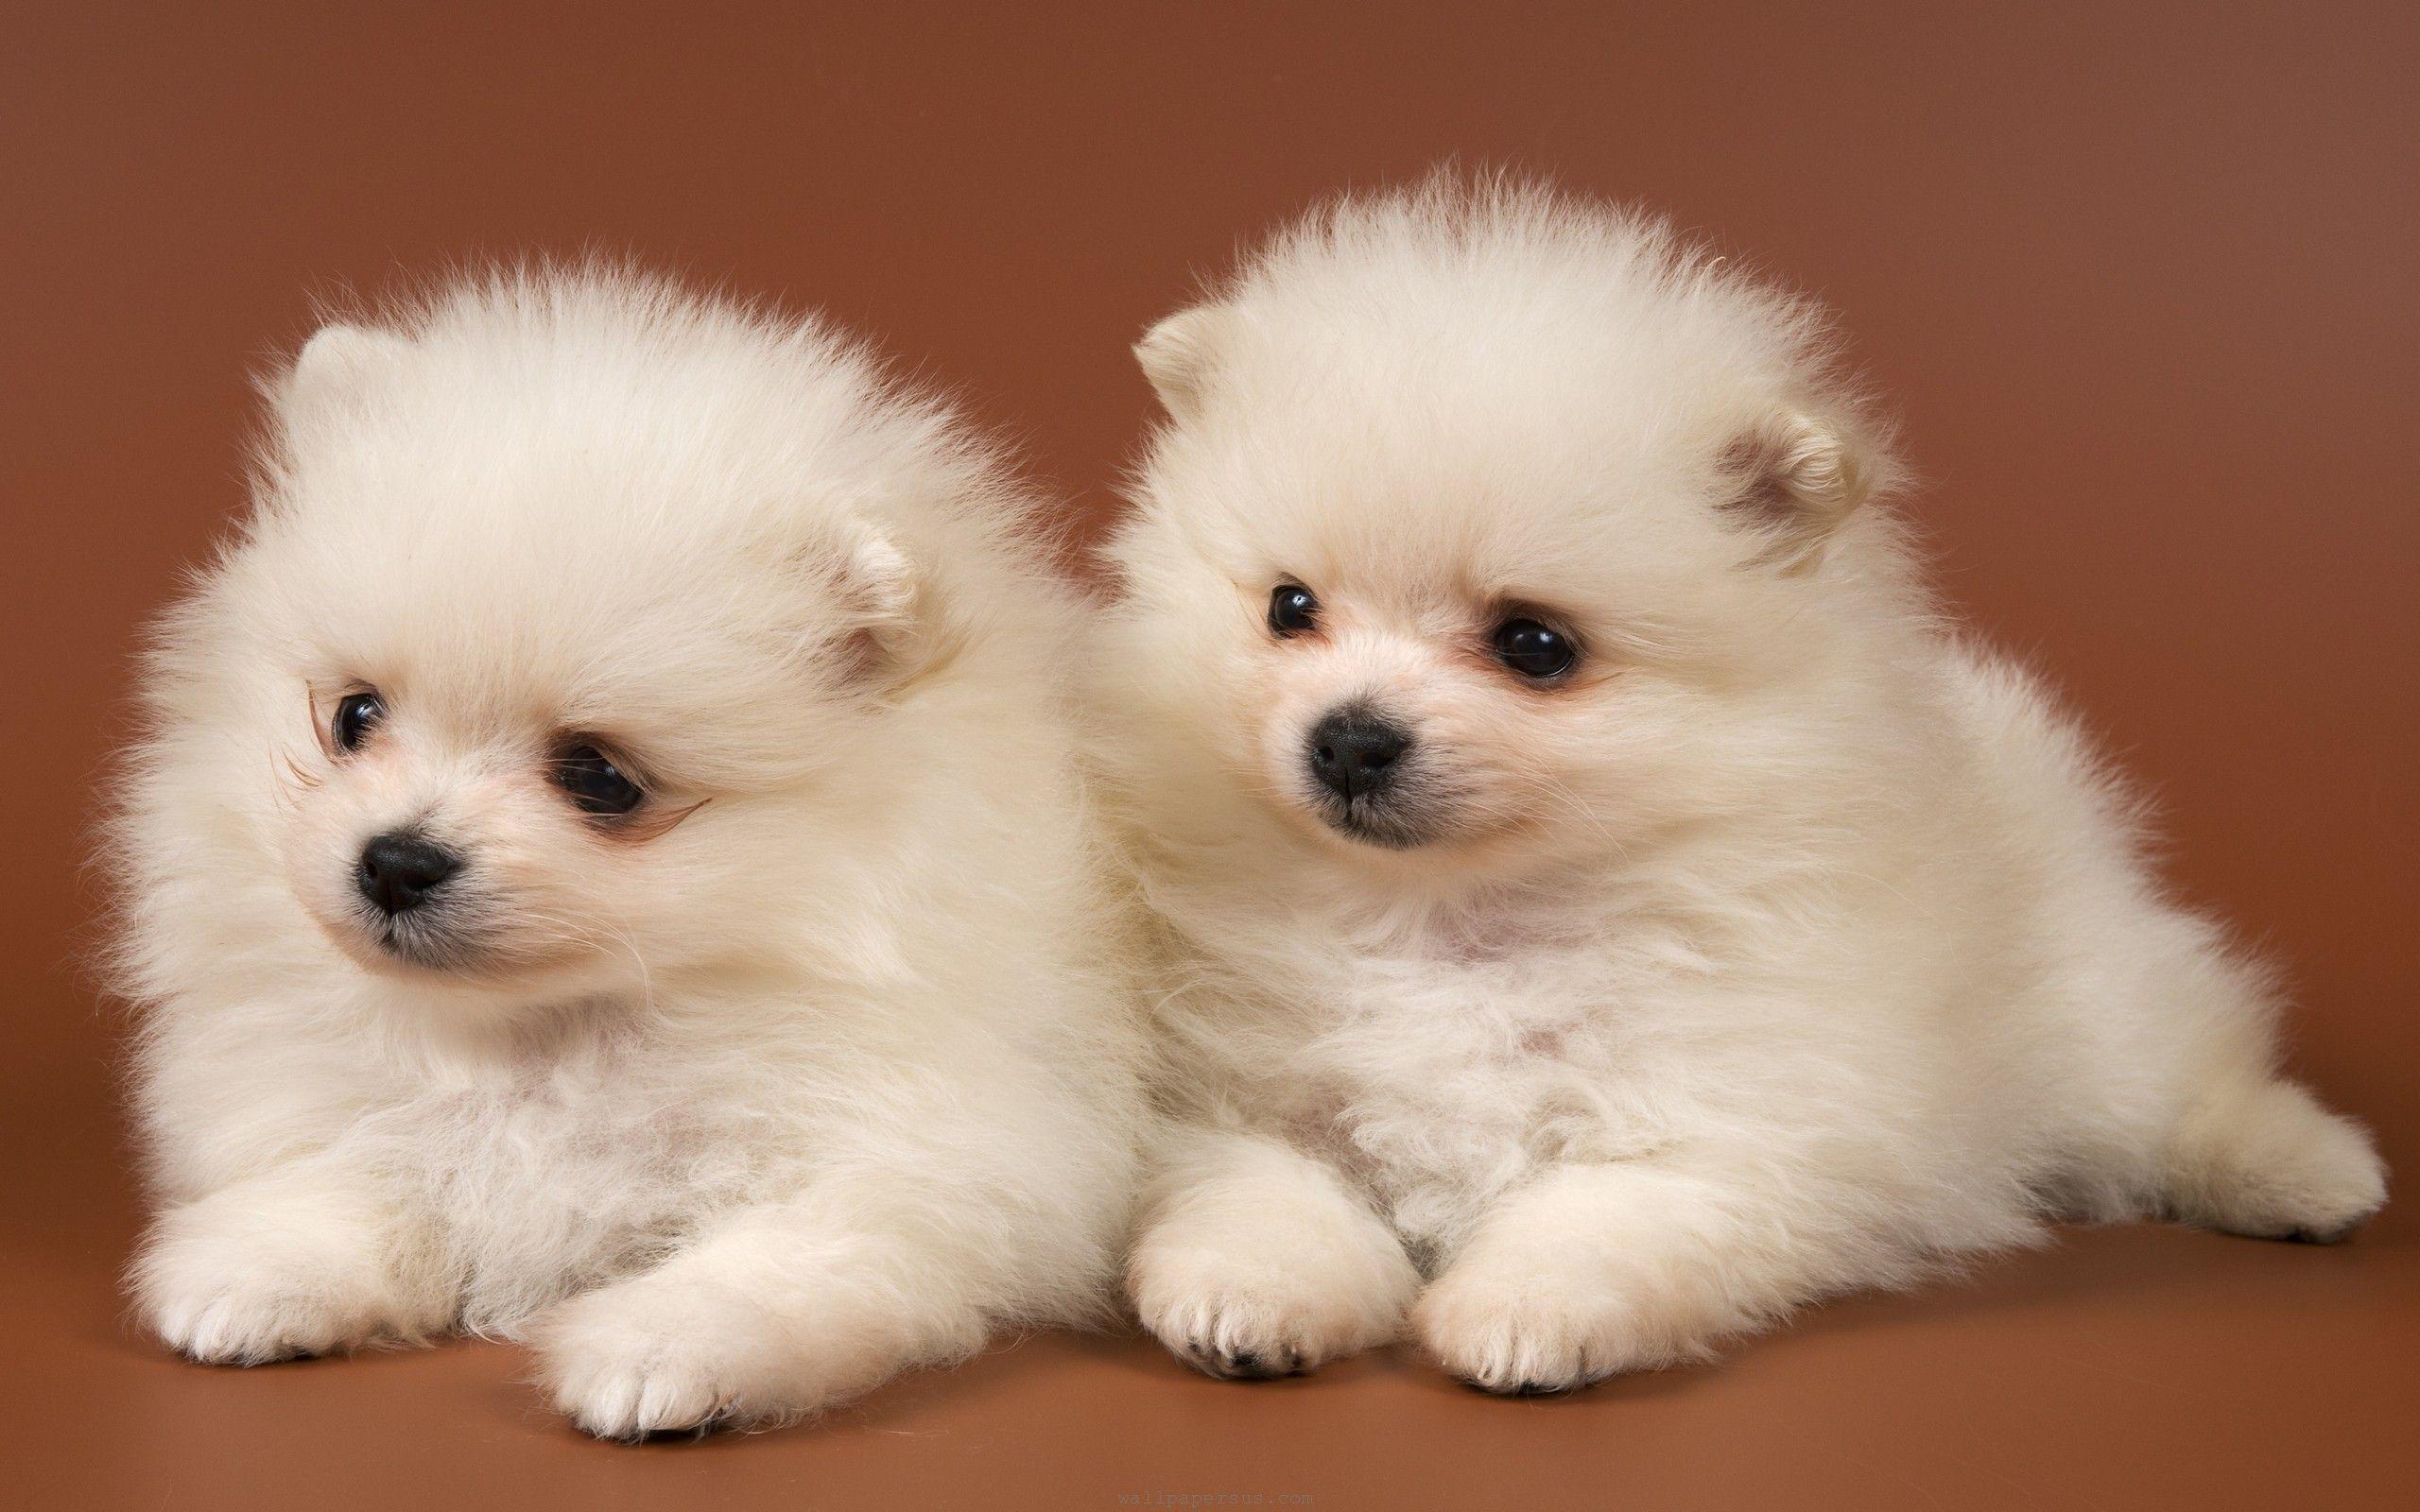 Cute Puppy Dogs Wallpaper Image & Picture